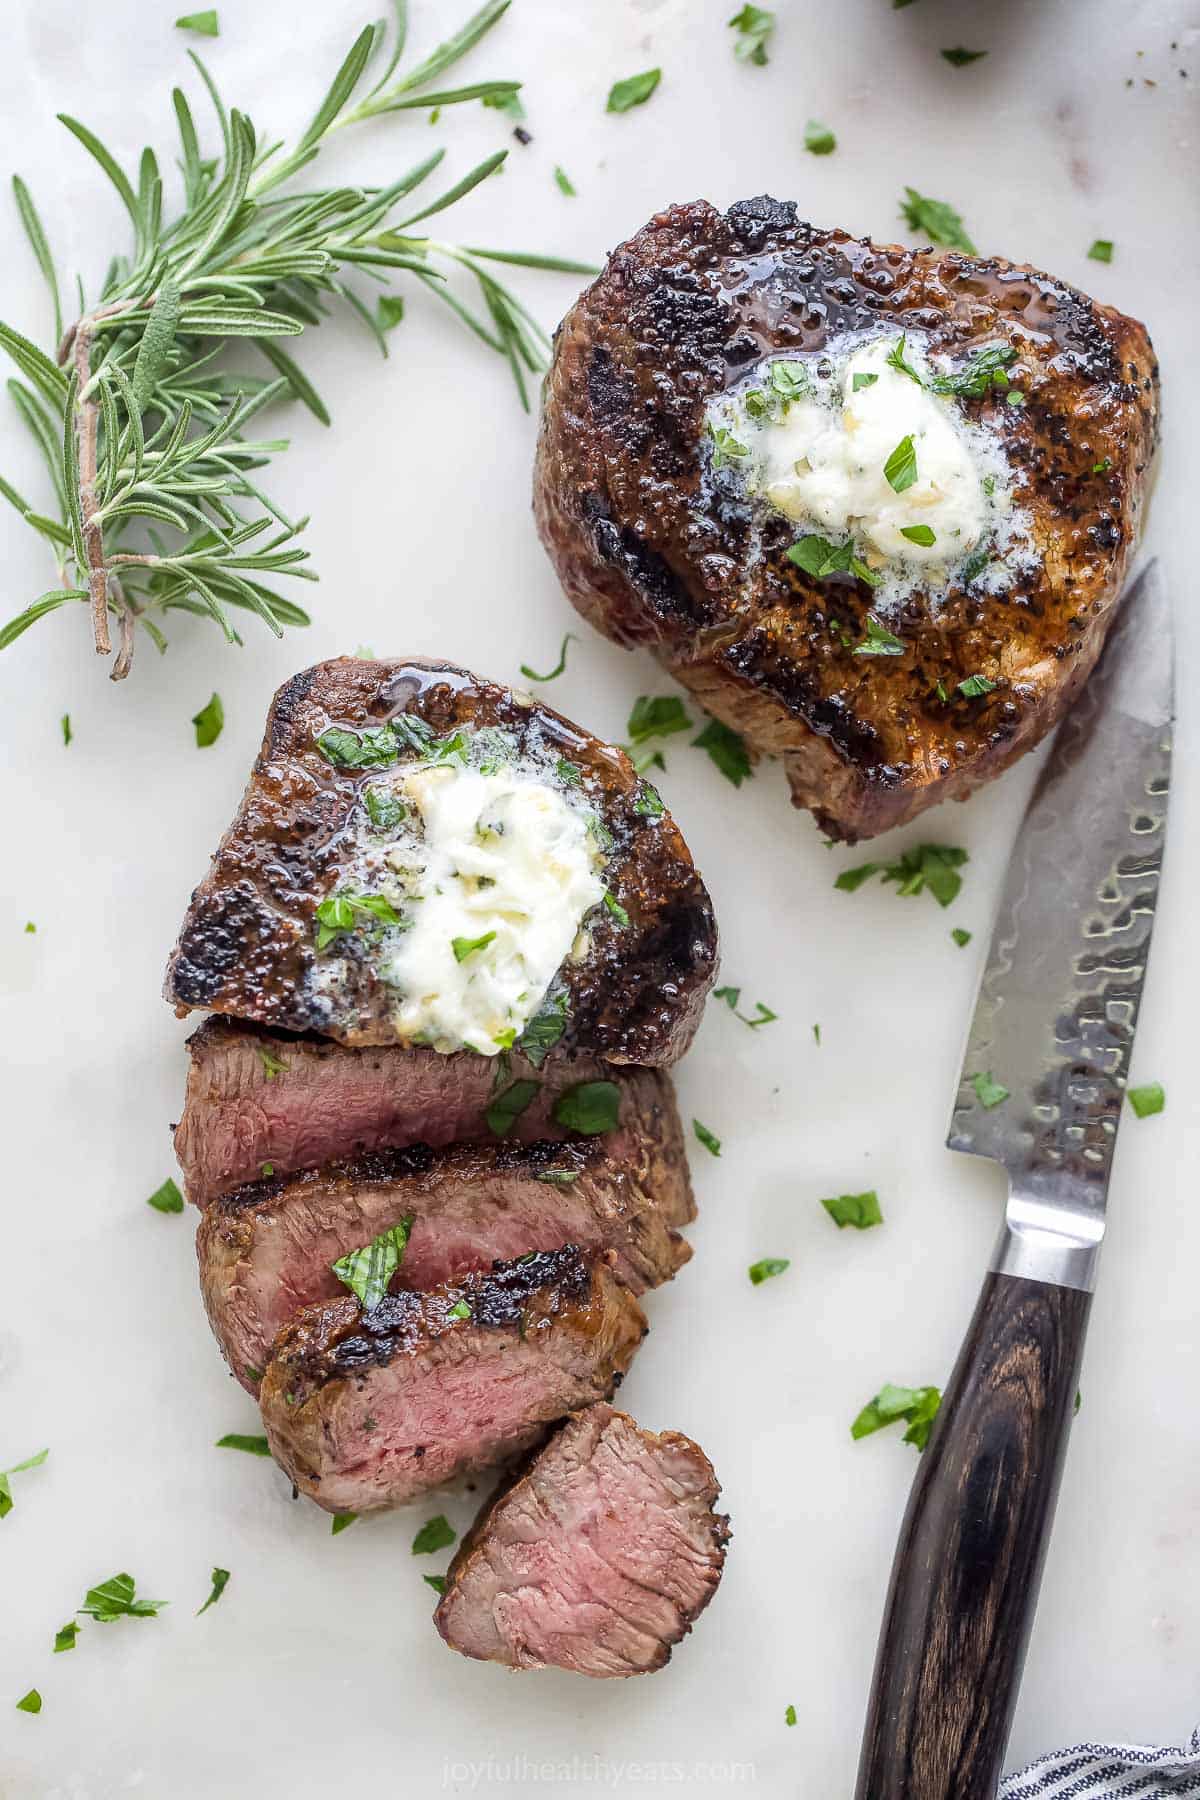 One whole grilled filet mignon and another sliced grilled filet mignon recipe.